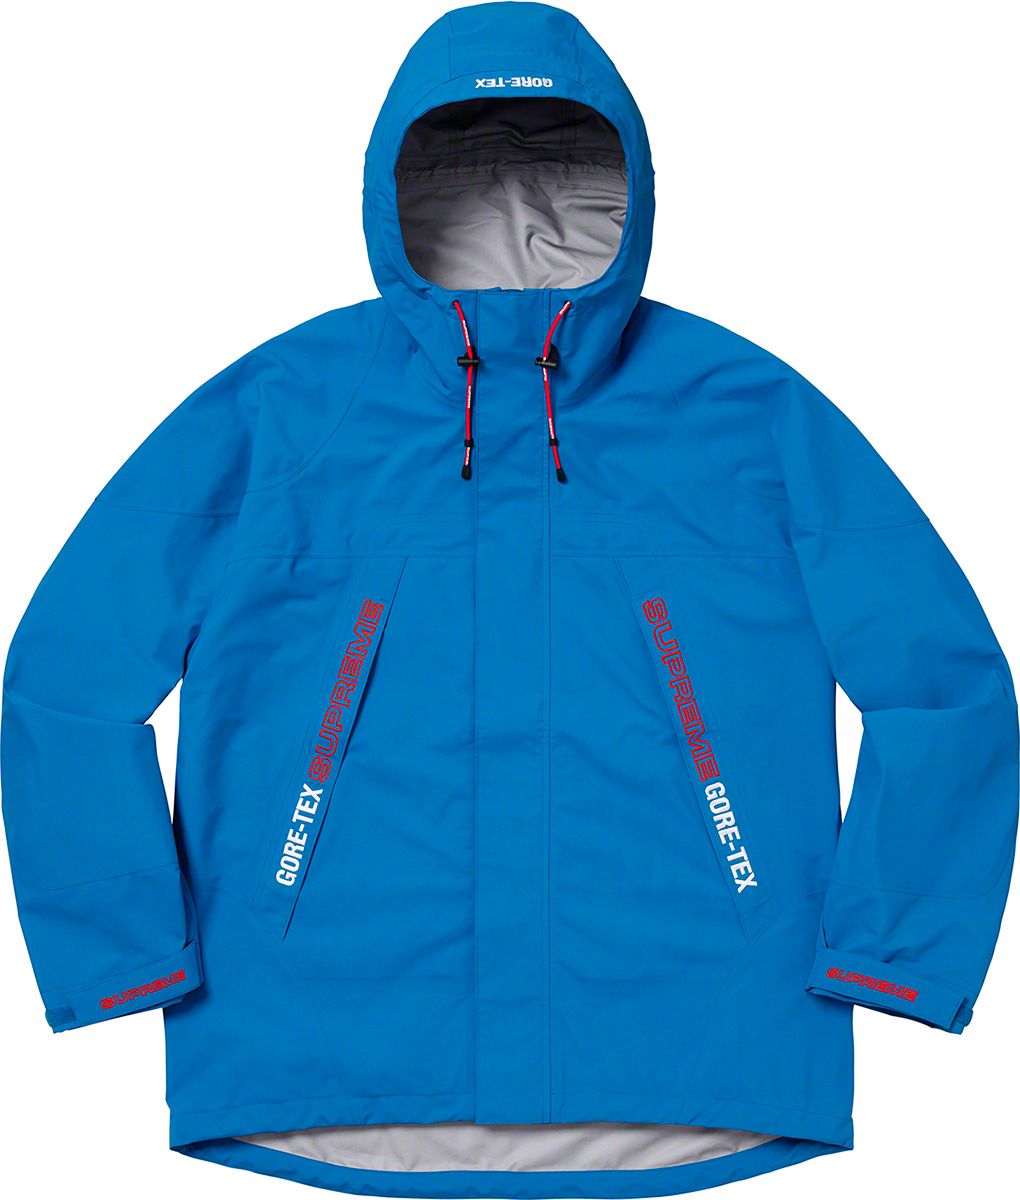 GORE-TEX Taped Seam Jacket - Fall/Winter 2019 Preview – Supreme